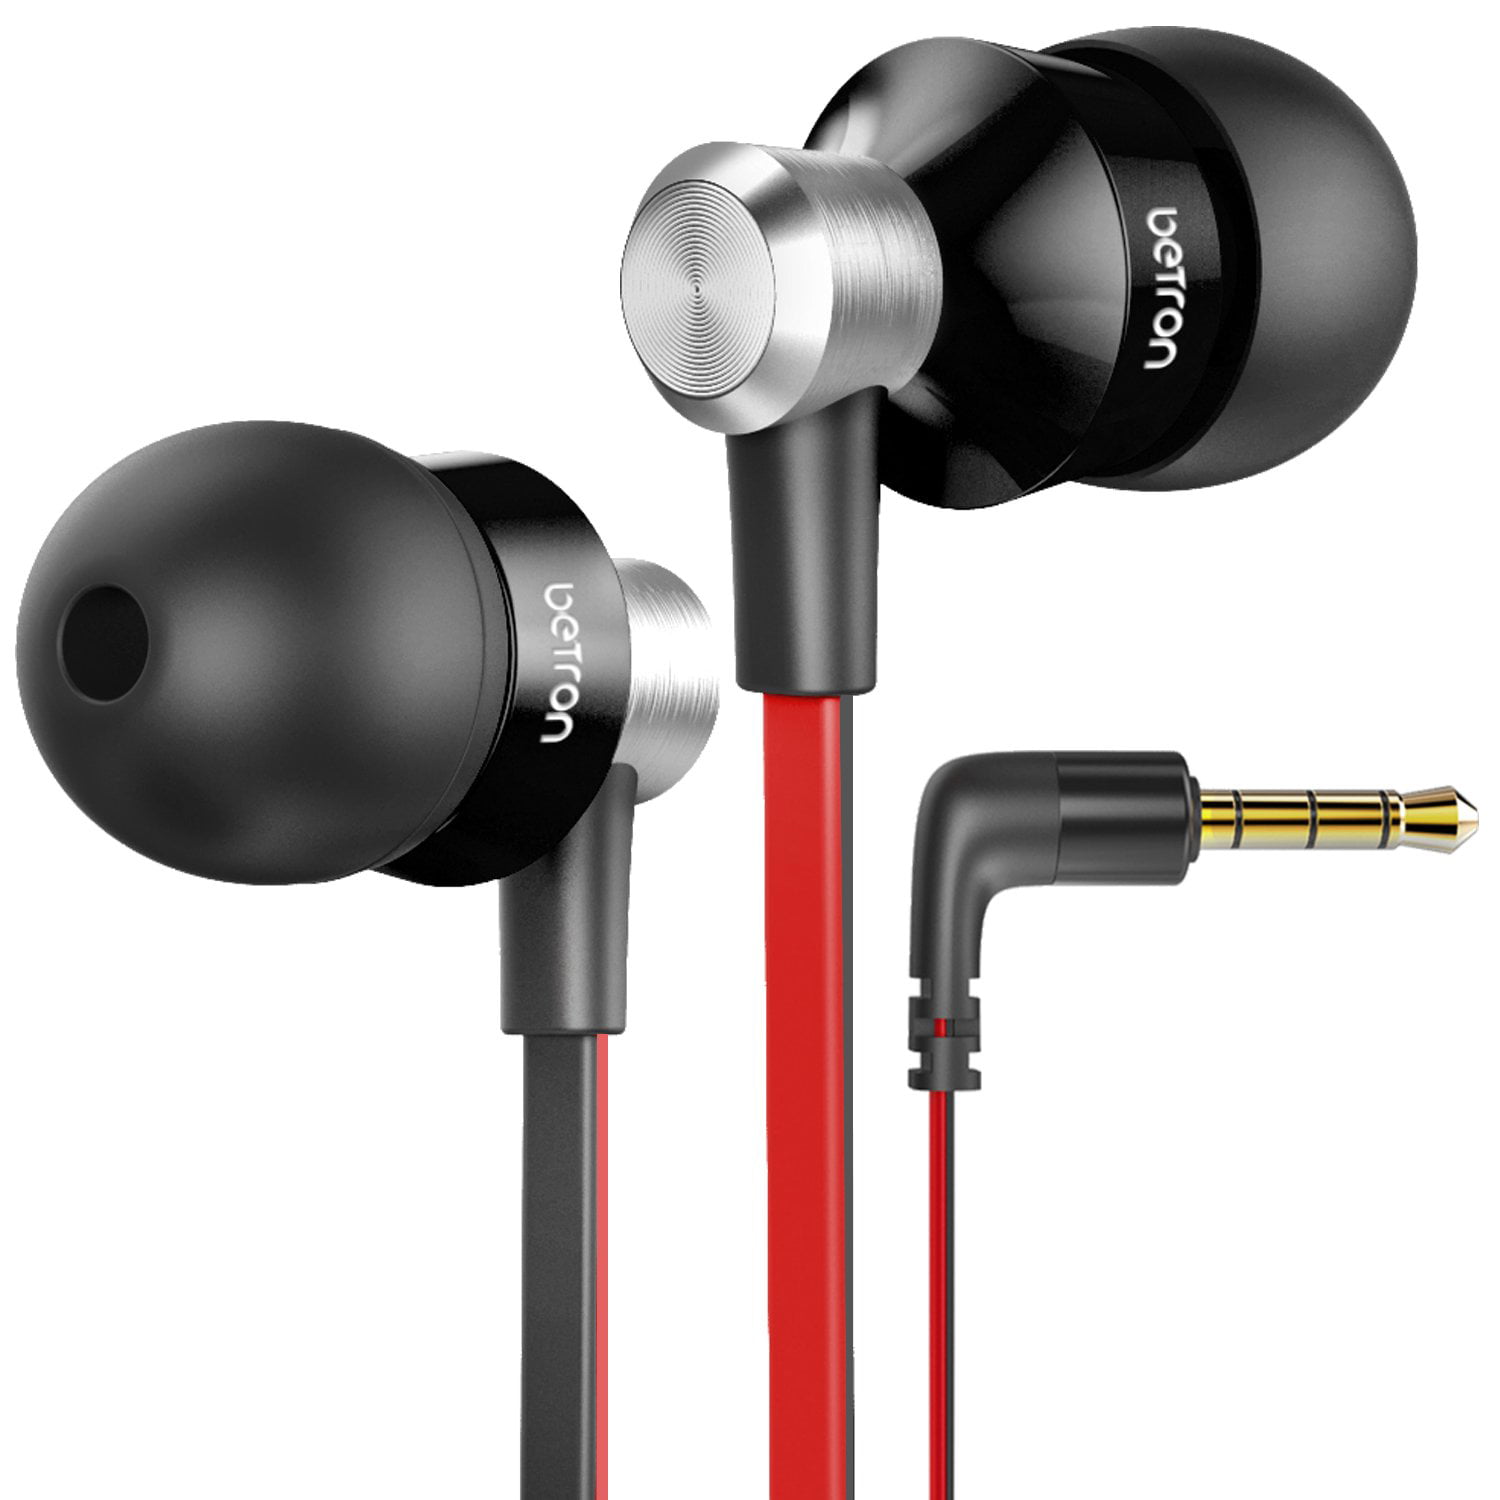 Wired Earbud Headphones with Microphone and Volume Control Black Noise Isolating Earphone Tips Tangle-Free Cord 3.5mm Bass Driven Audio Betron DC950HI Earbuds